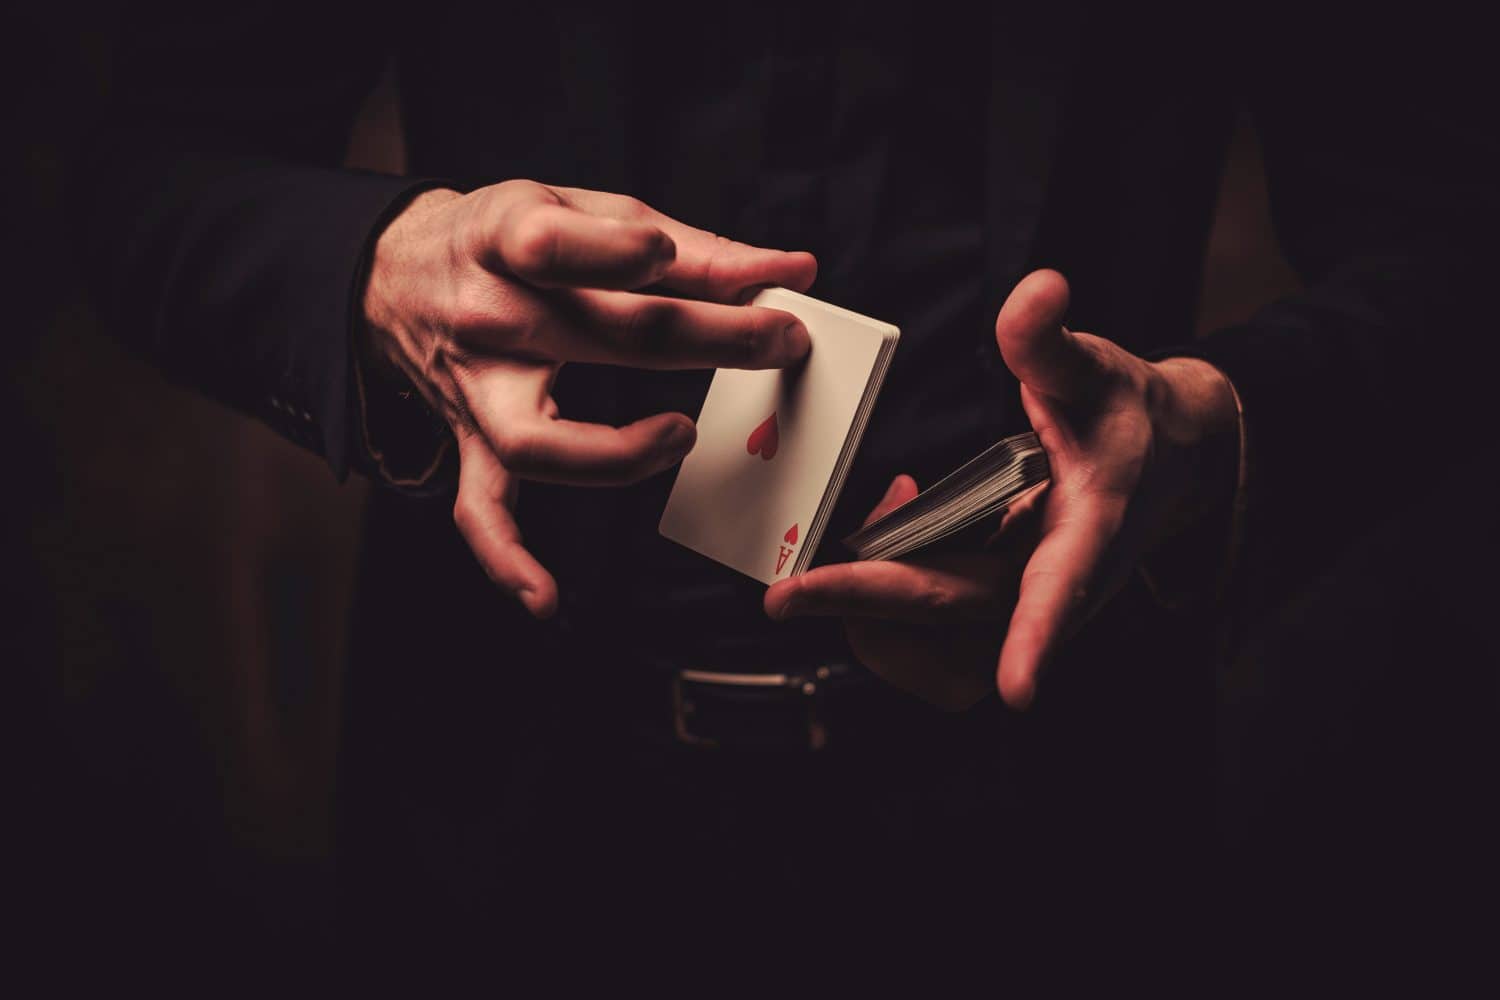 Man showing tricks with cards